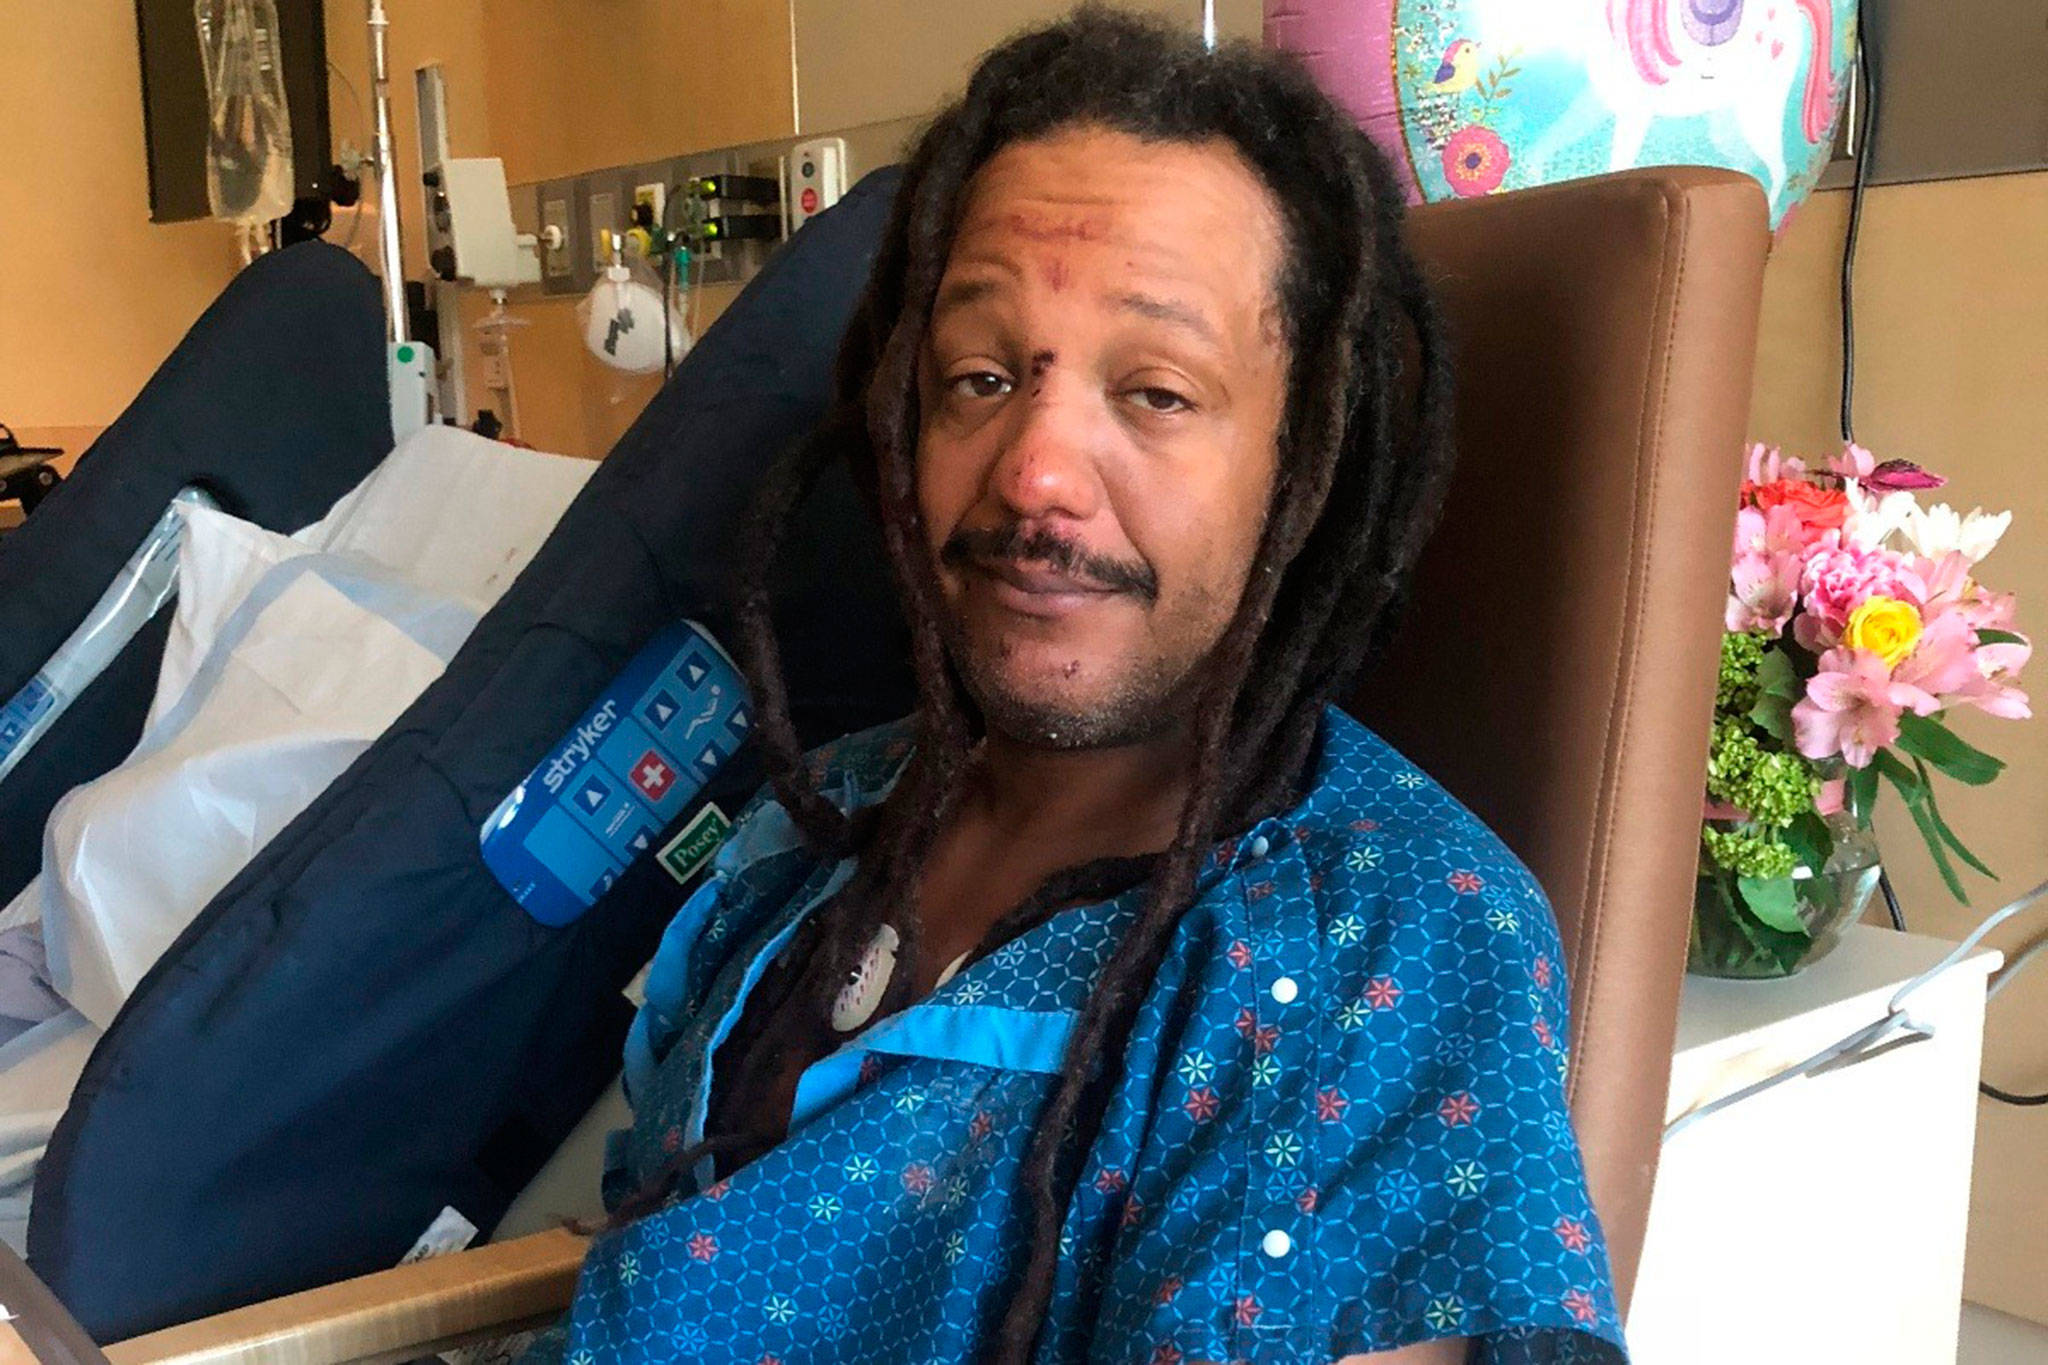 Joe Allen Jr., of Port Angeles continues to recuperate in Wenatchee after he was struck in the back of the head with a rock at a Phish concert in the Gorge Amphitheater on July 21.